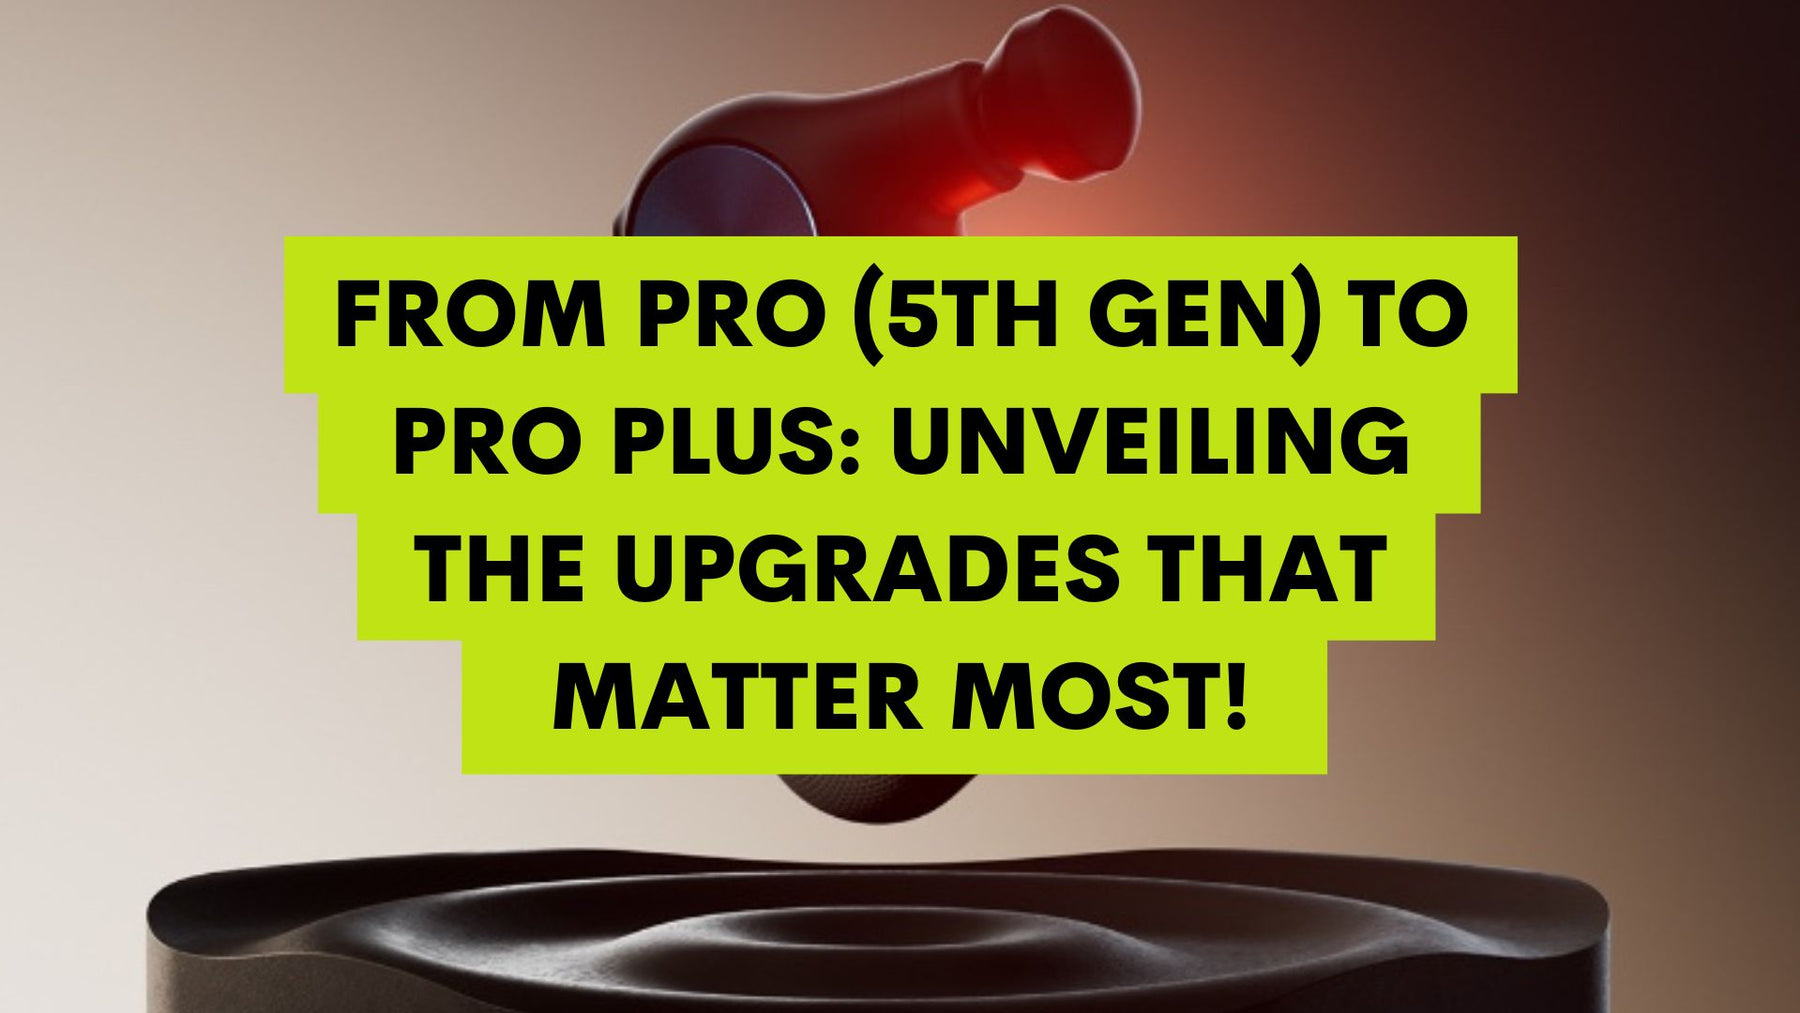 From Pro (5th Gen) to Pro Plus: Unveiling the Upgrades That Matter Most!